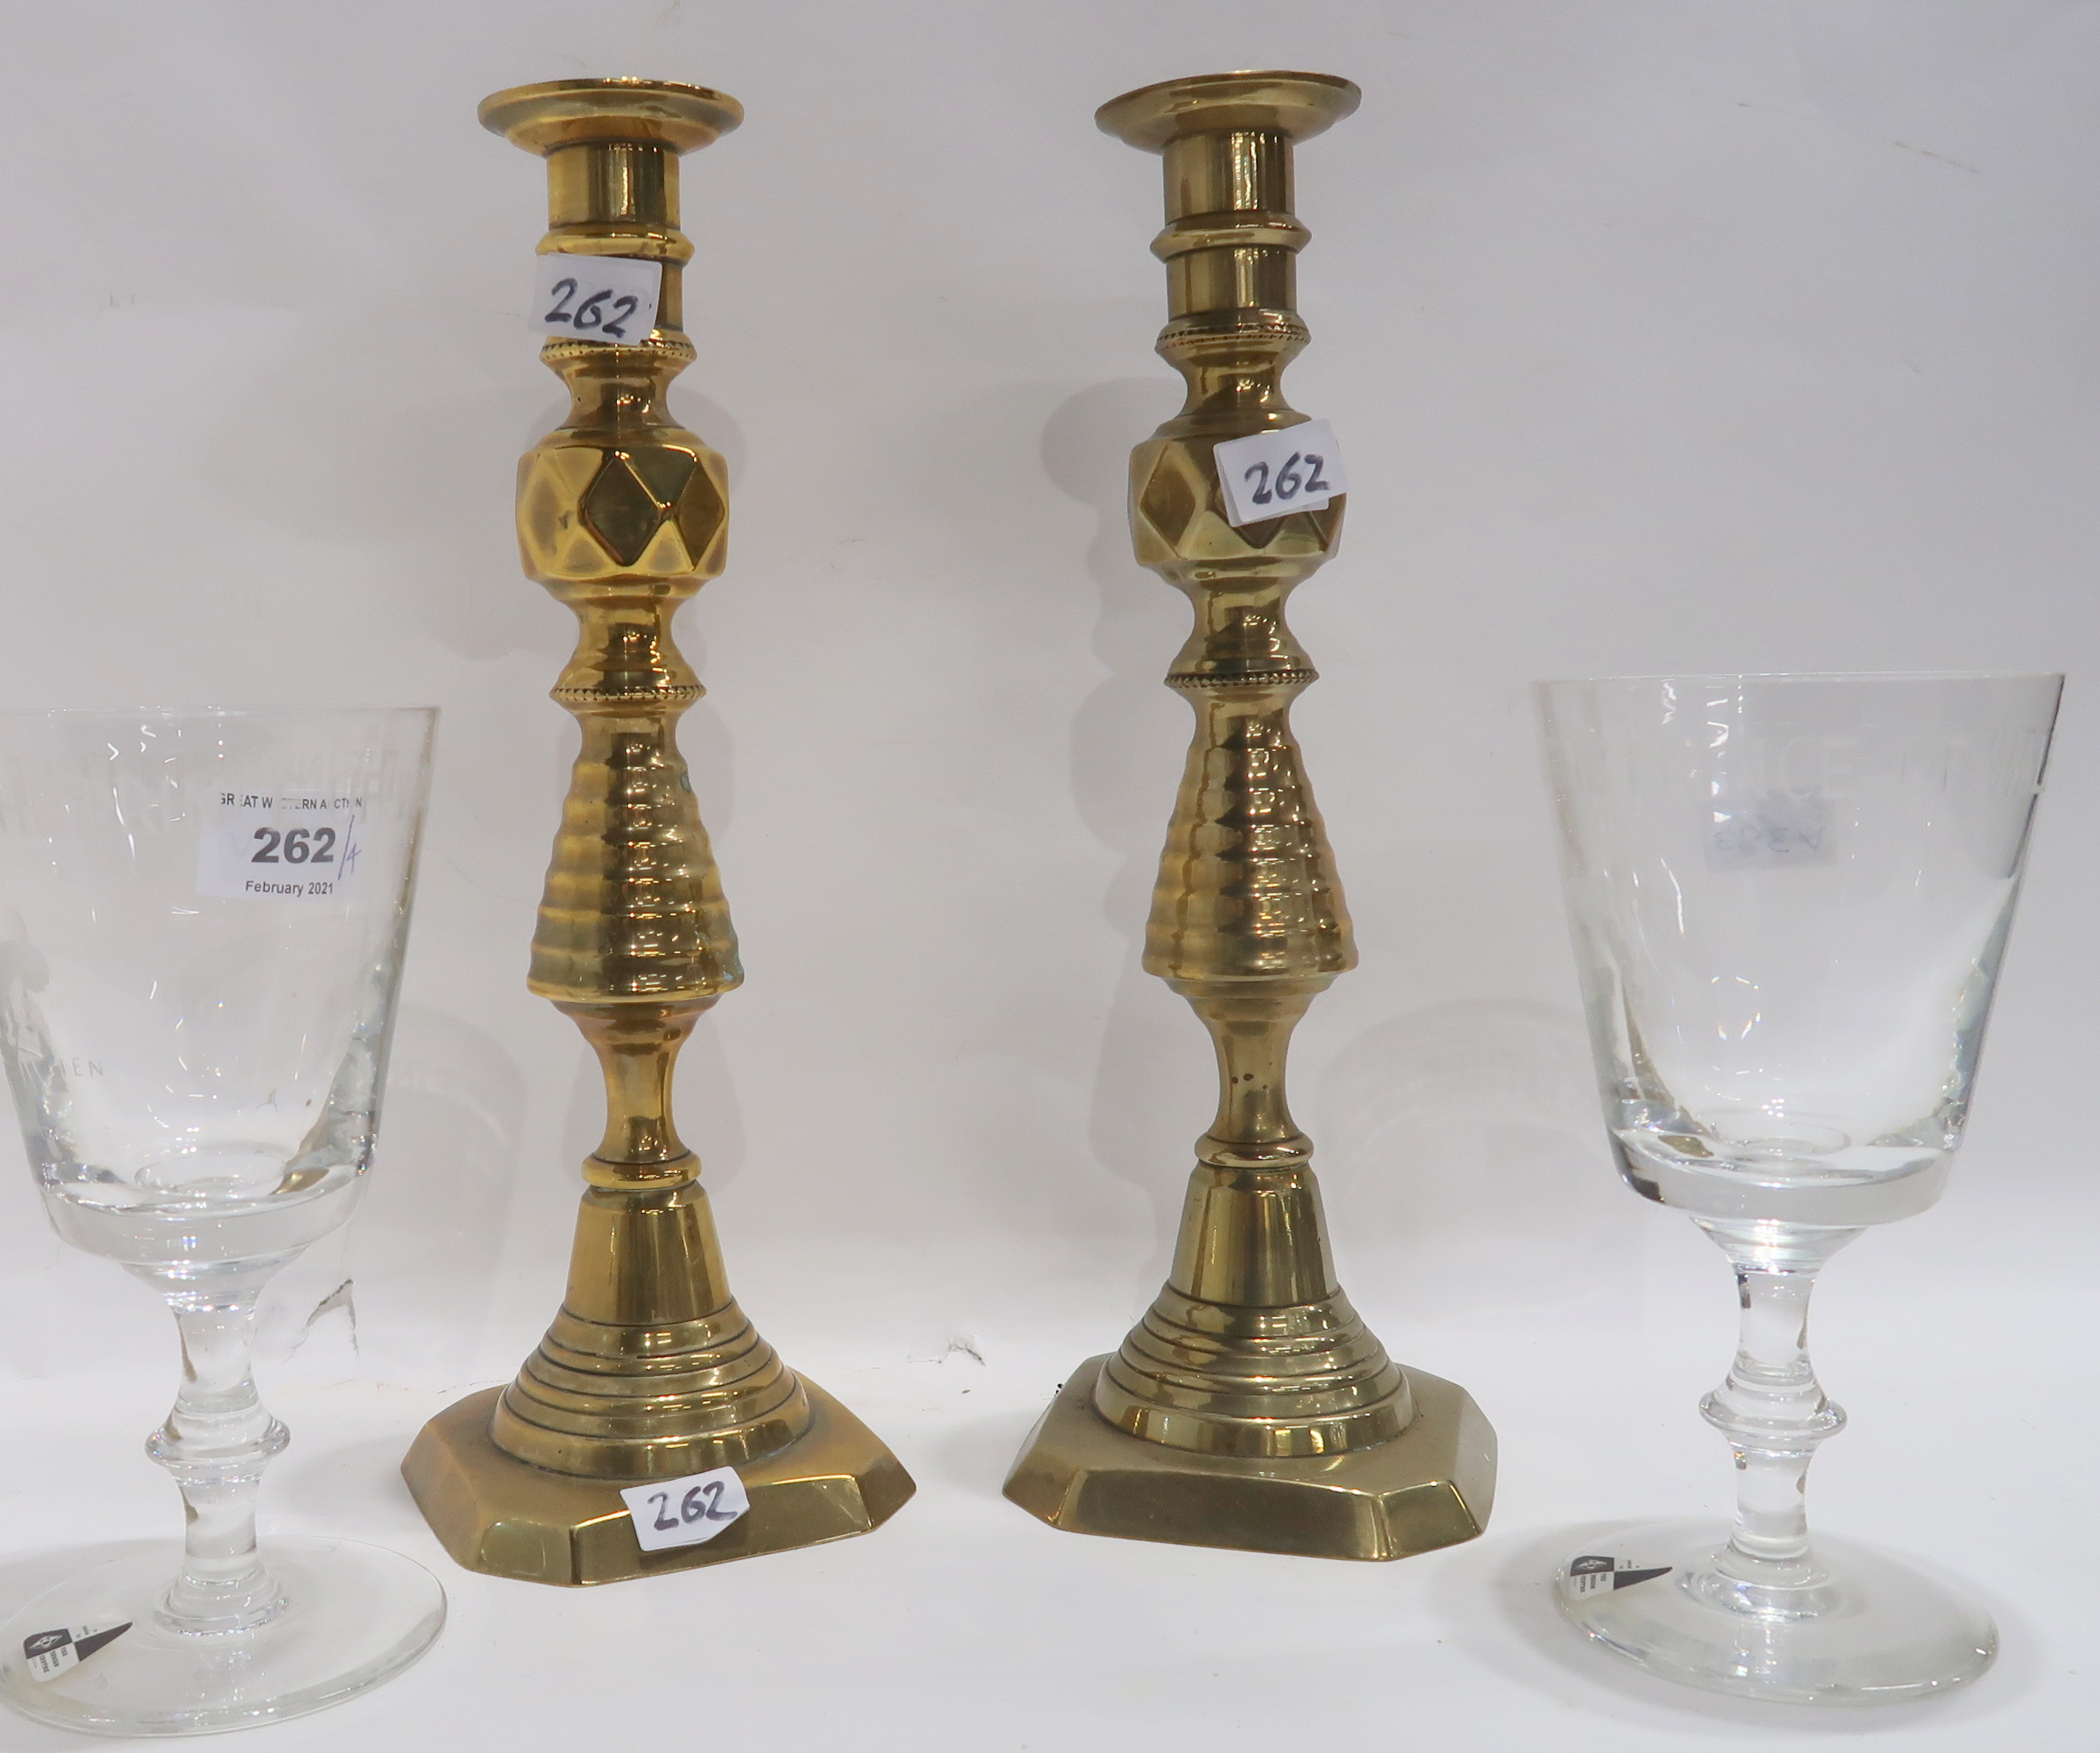 A pair of brass candlesticks and a pair of glass goblet produced for the Design Centre to